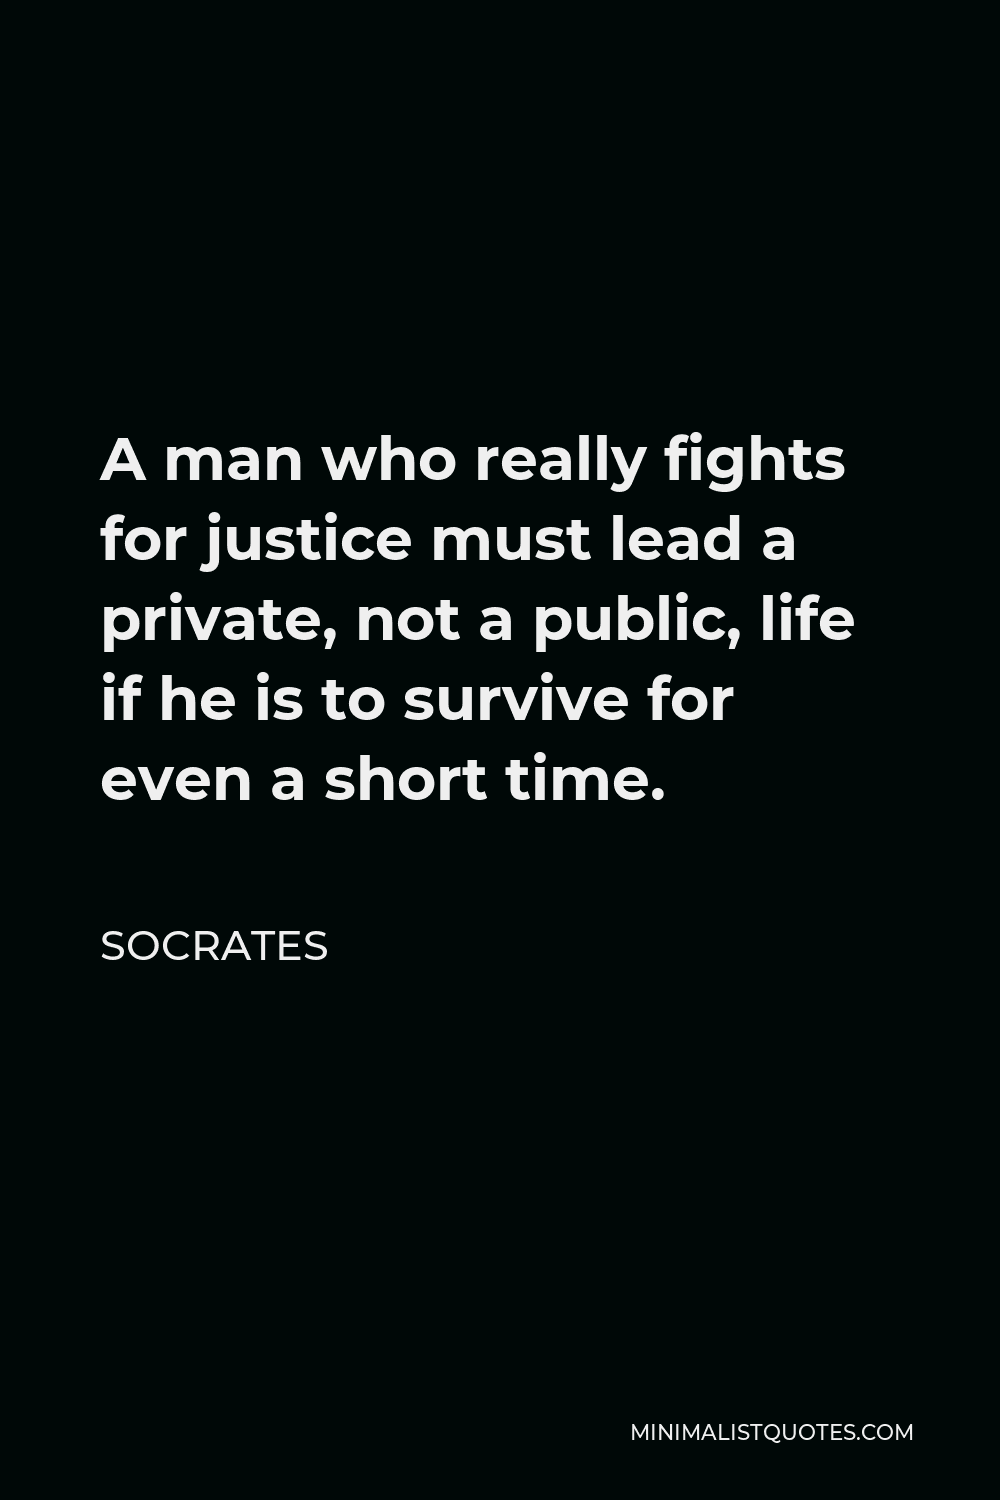 Socrates Quote - A man who really fights for justice must lead a private, not a public, life if he is to survive for even a short time.